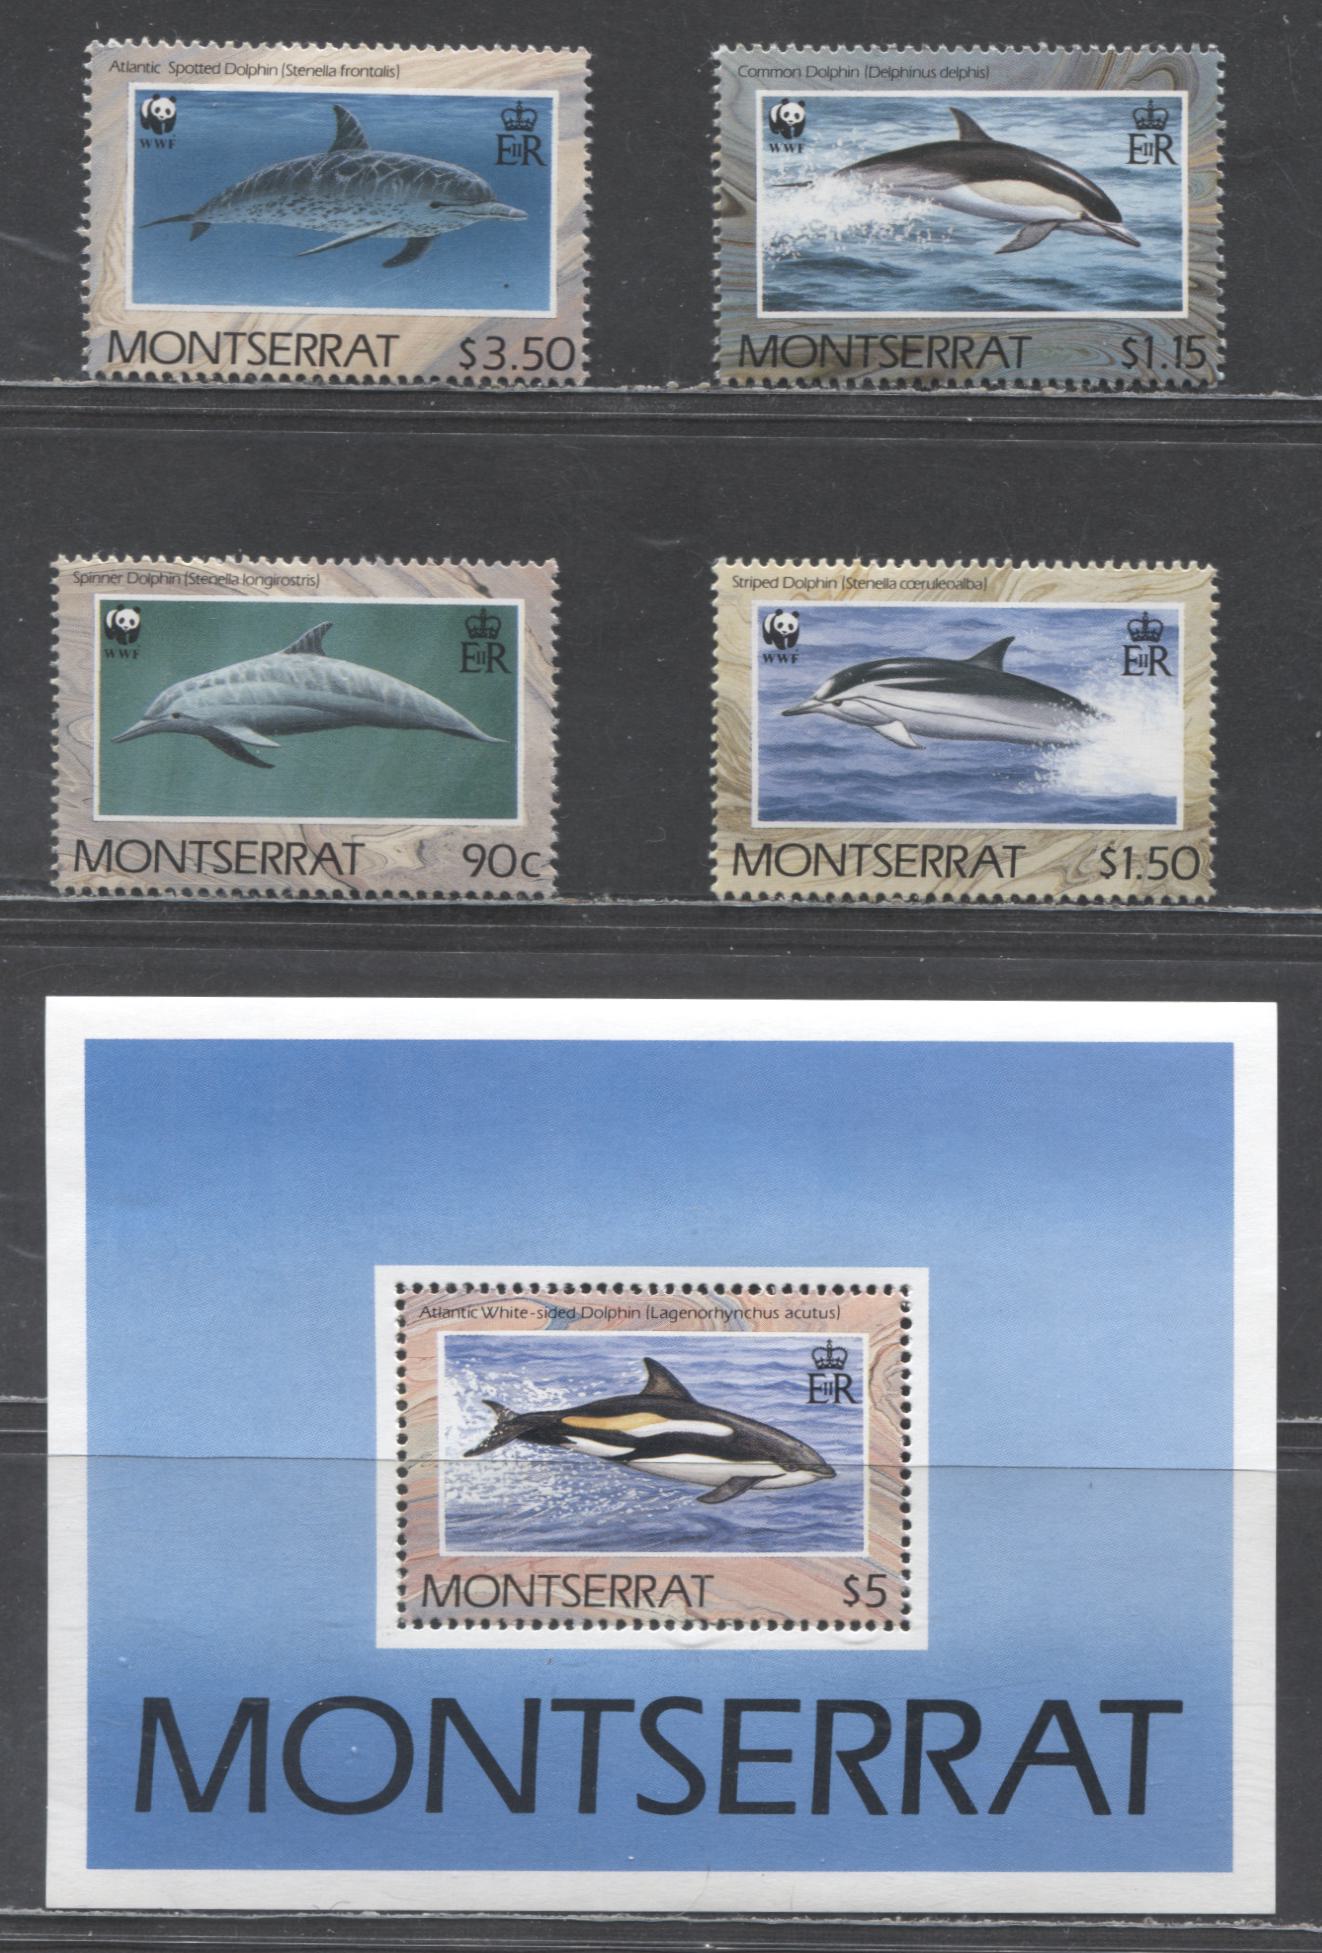 Lot 92 Montserrat SC#753-757 1990 Dolphins Issue, 5 VFOG & NH Singles & Souvenir Sheet, Click on Listing to See ALL Pictures, 2017 Scott Cat. $28.85